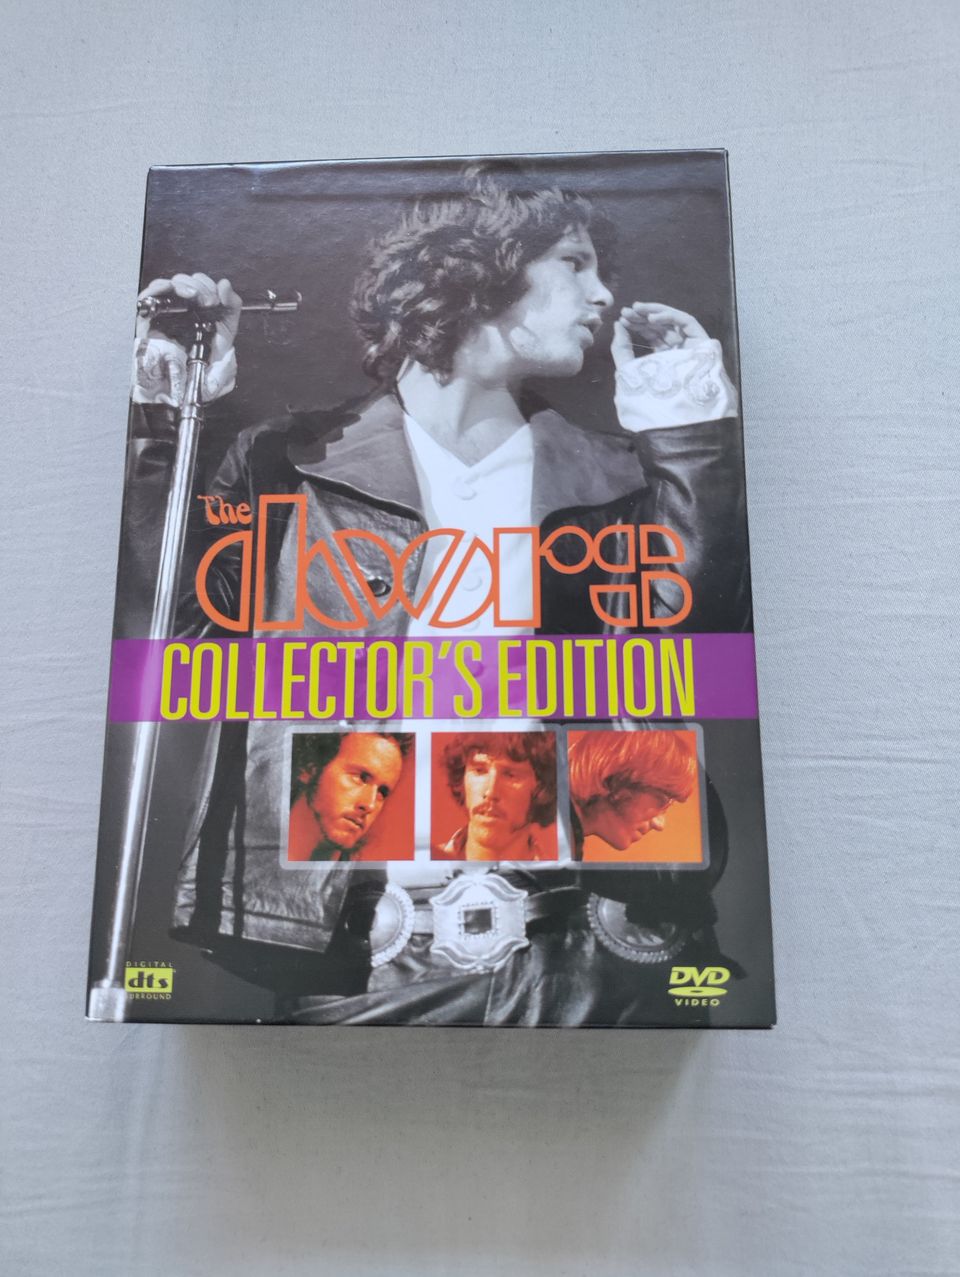 The Doors Collector's edition live DVD box set